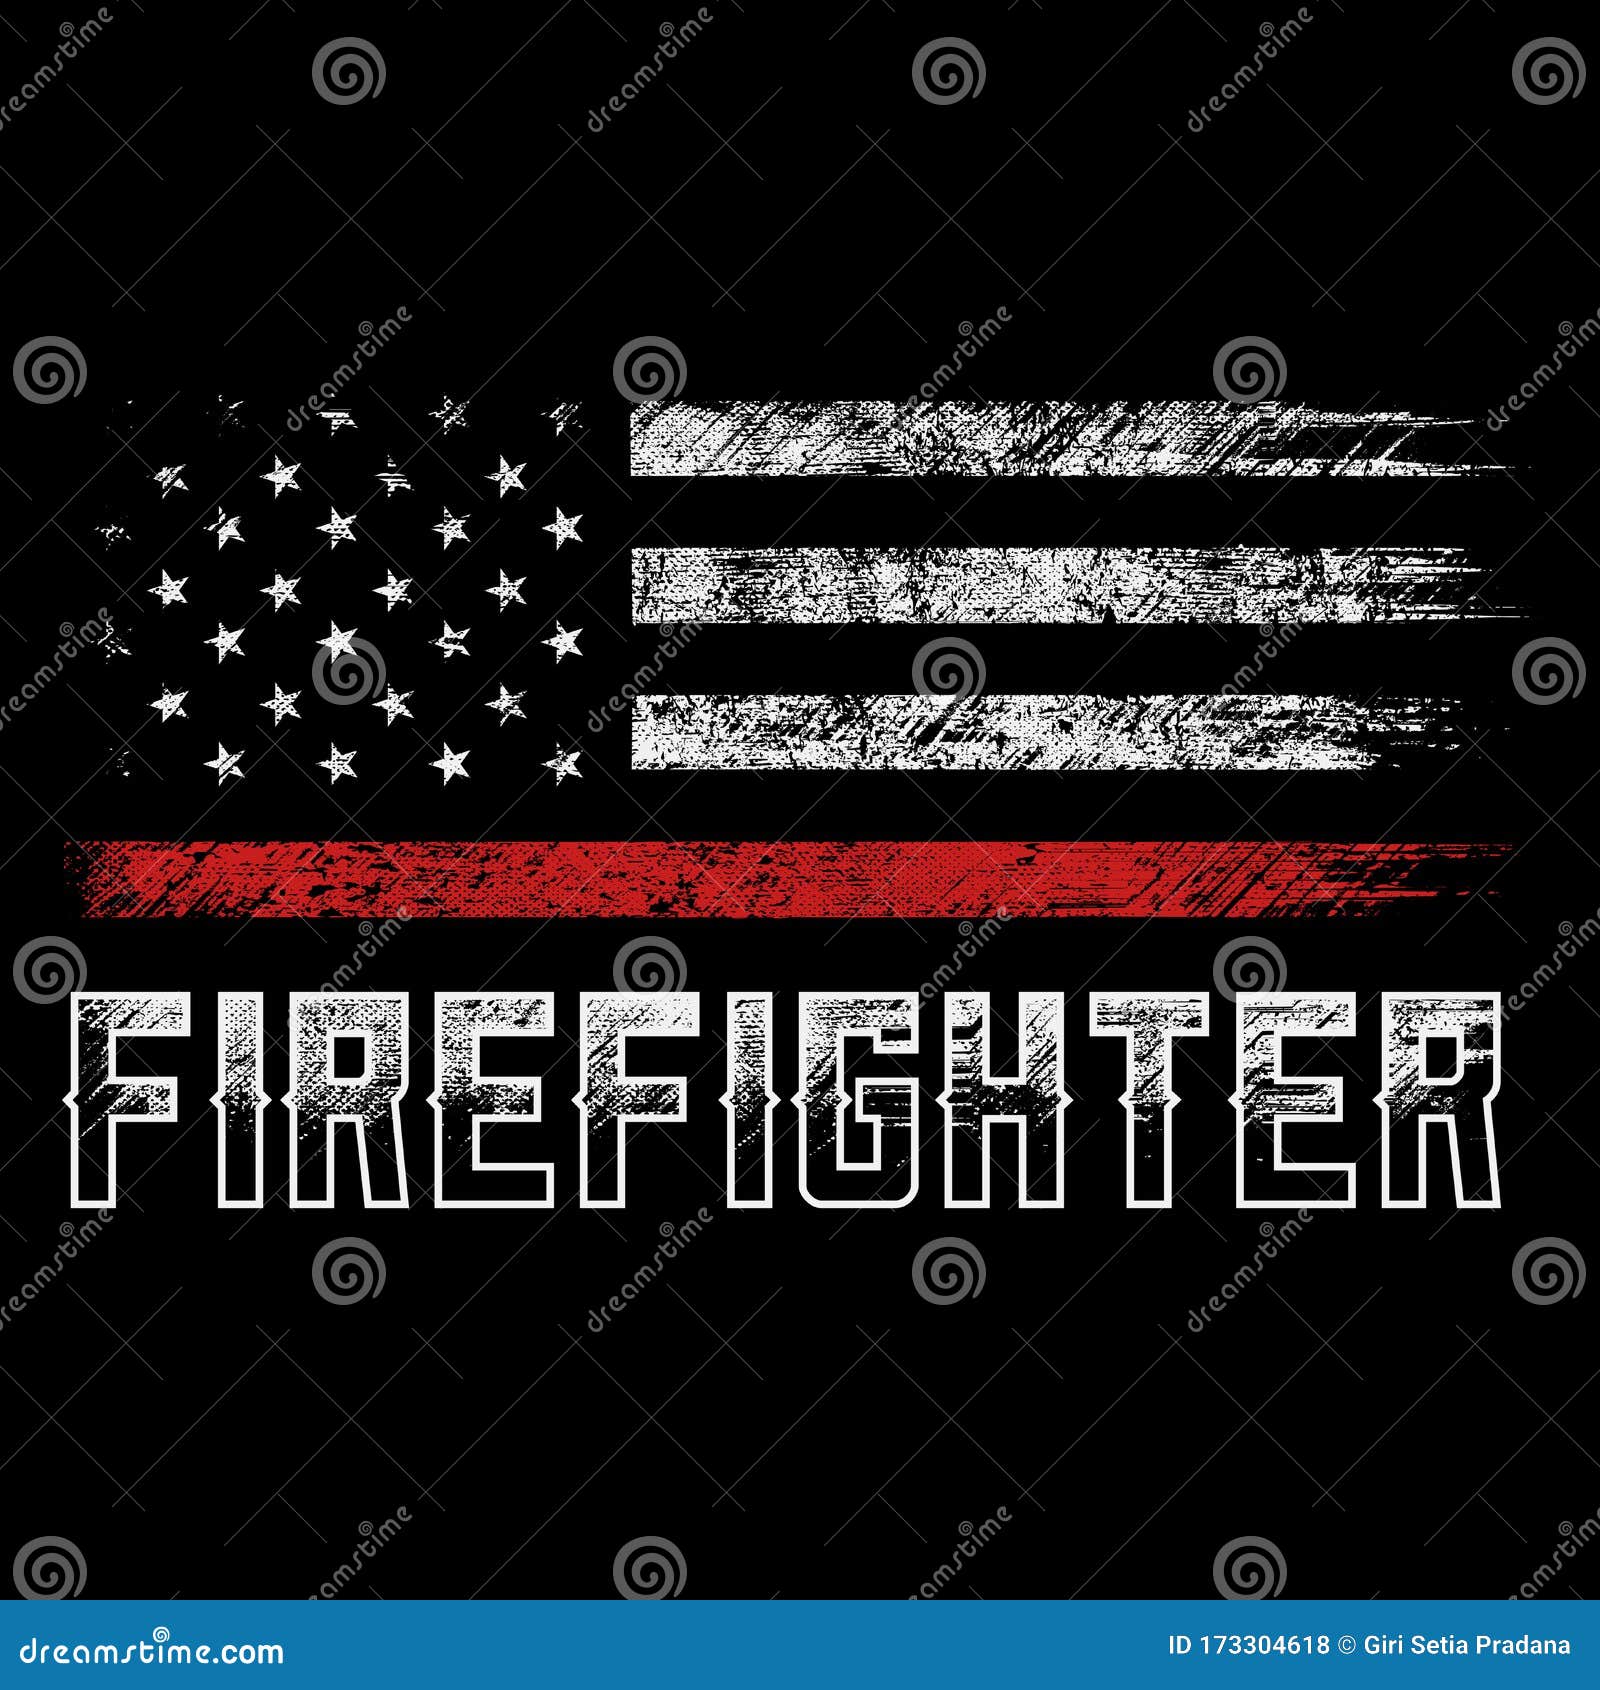 Collection  Top 35 free firefighter wallpaper for android HD Download   Firefighter Firefighter art Fire fighter tattoos